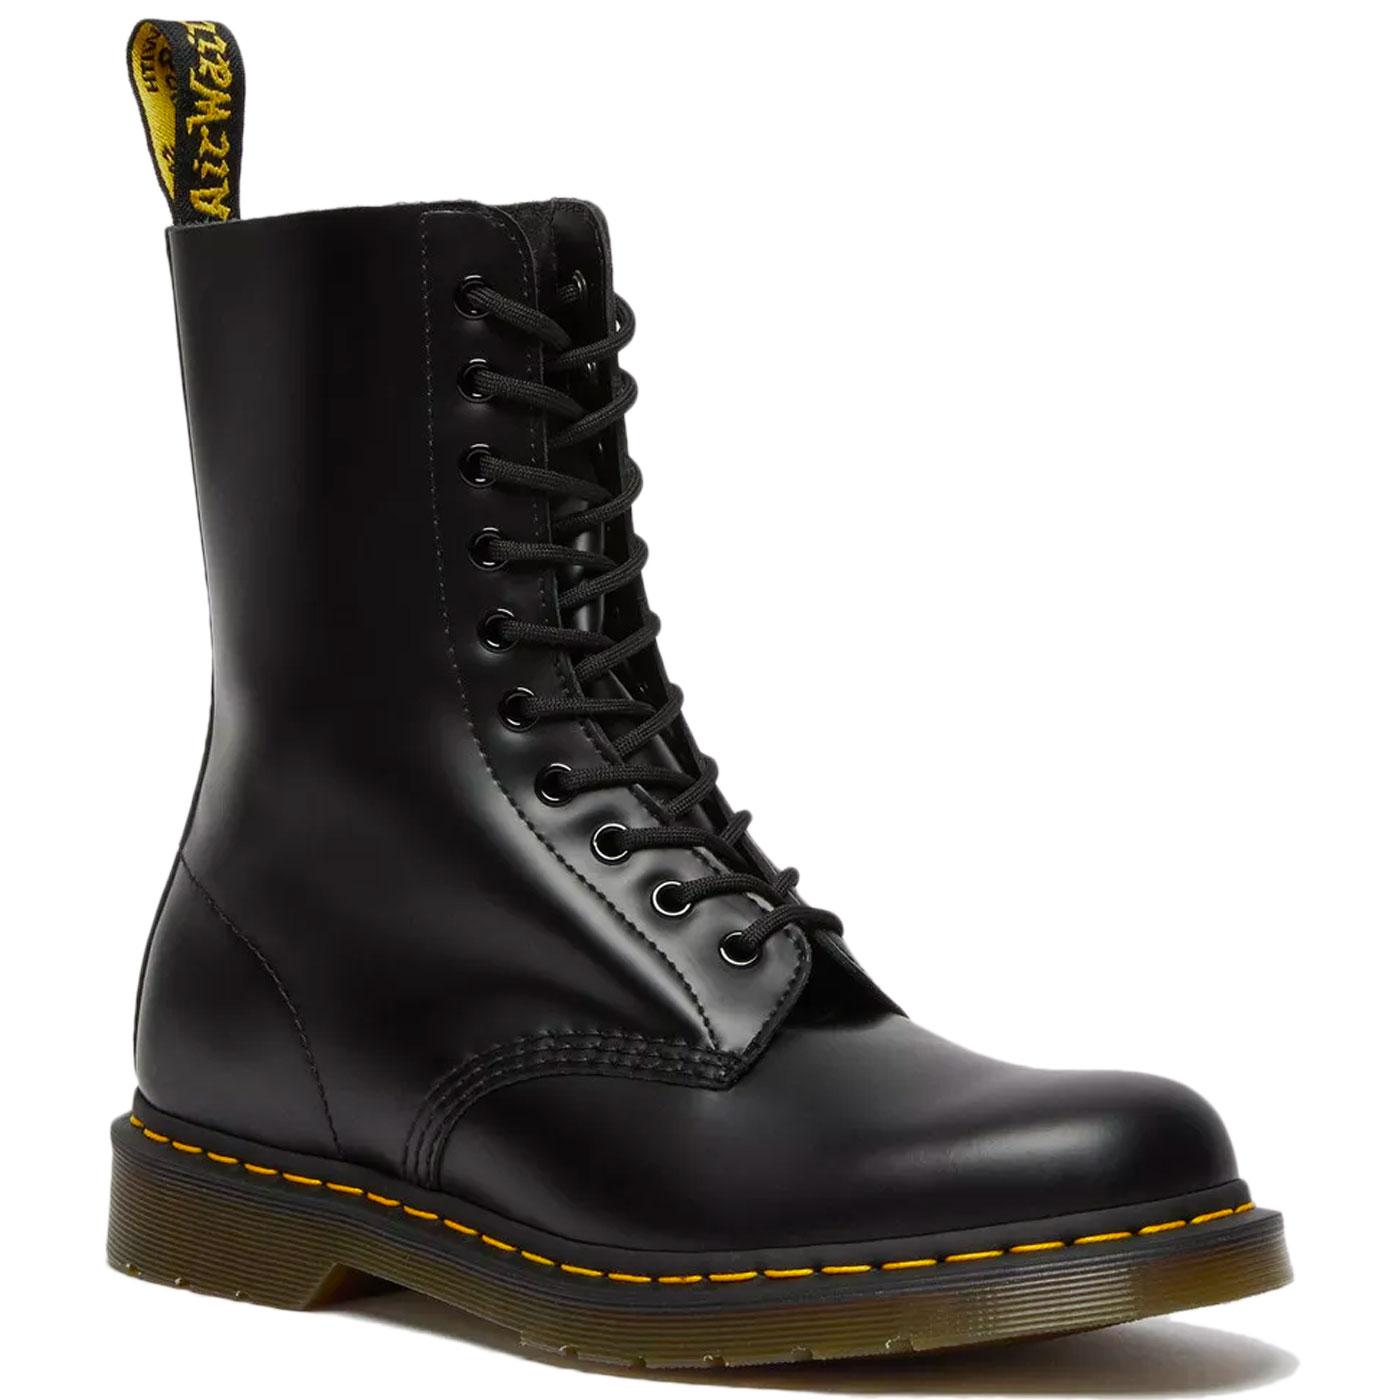 1490 Smooth DR MARTENS Women's 10 Eyelet Boots